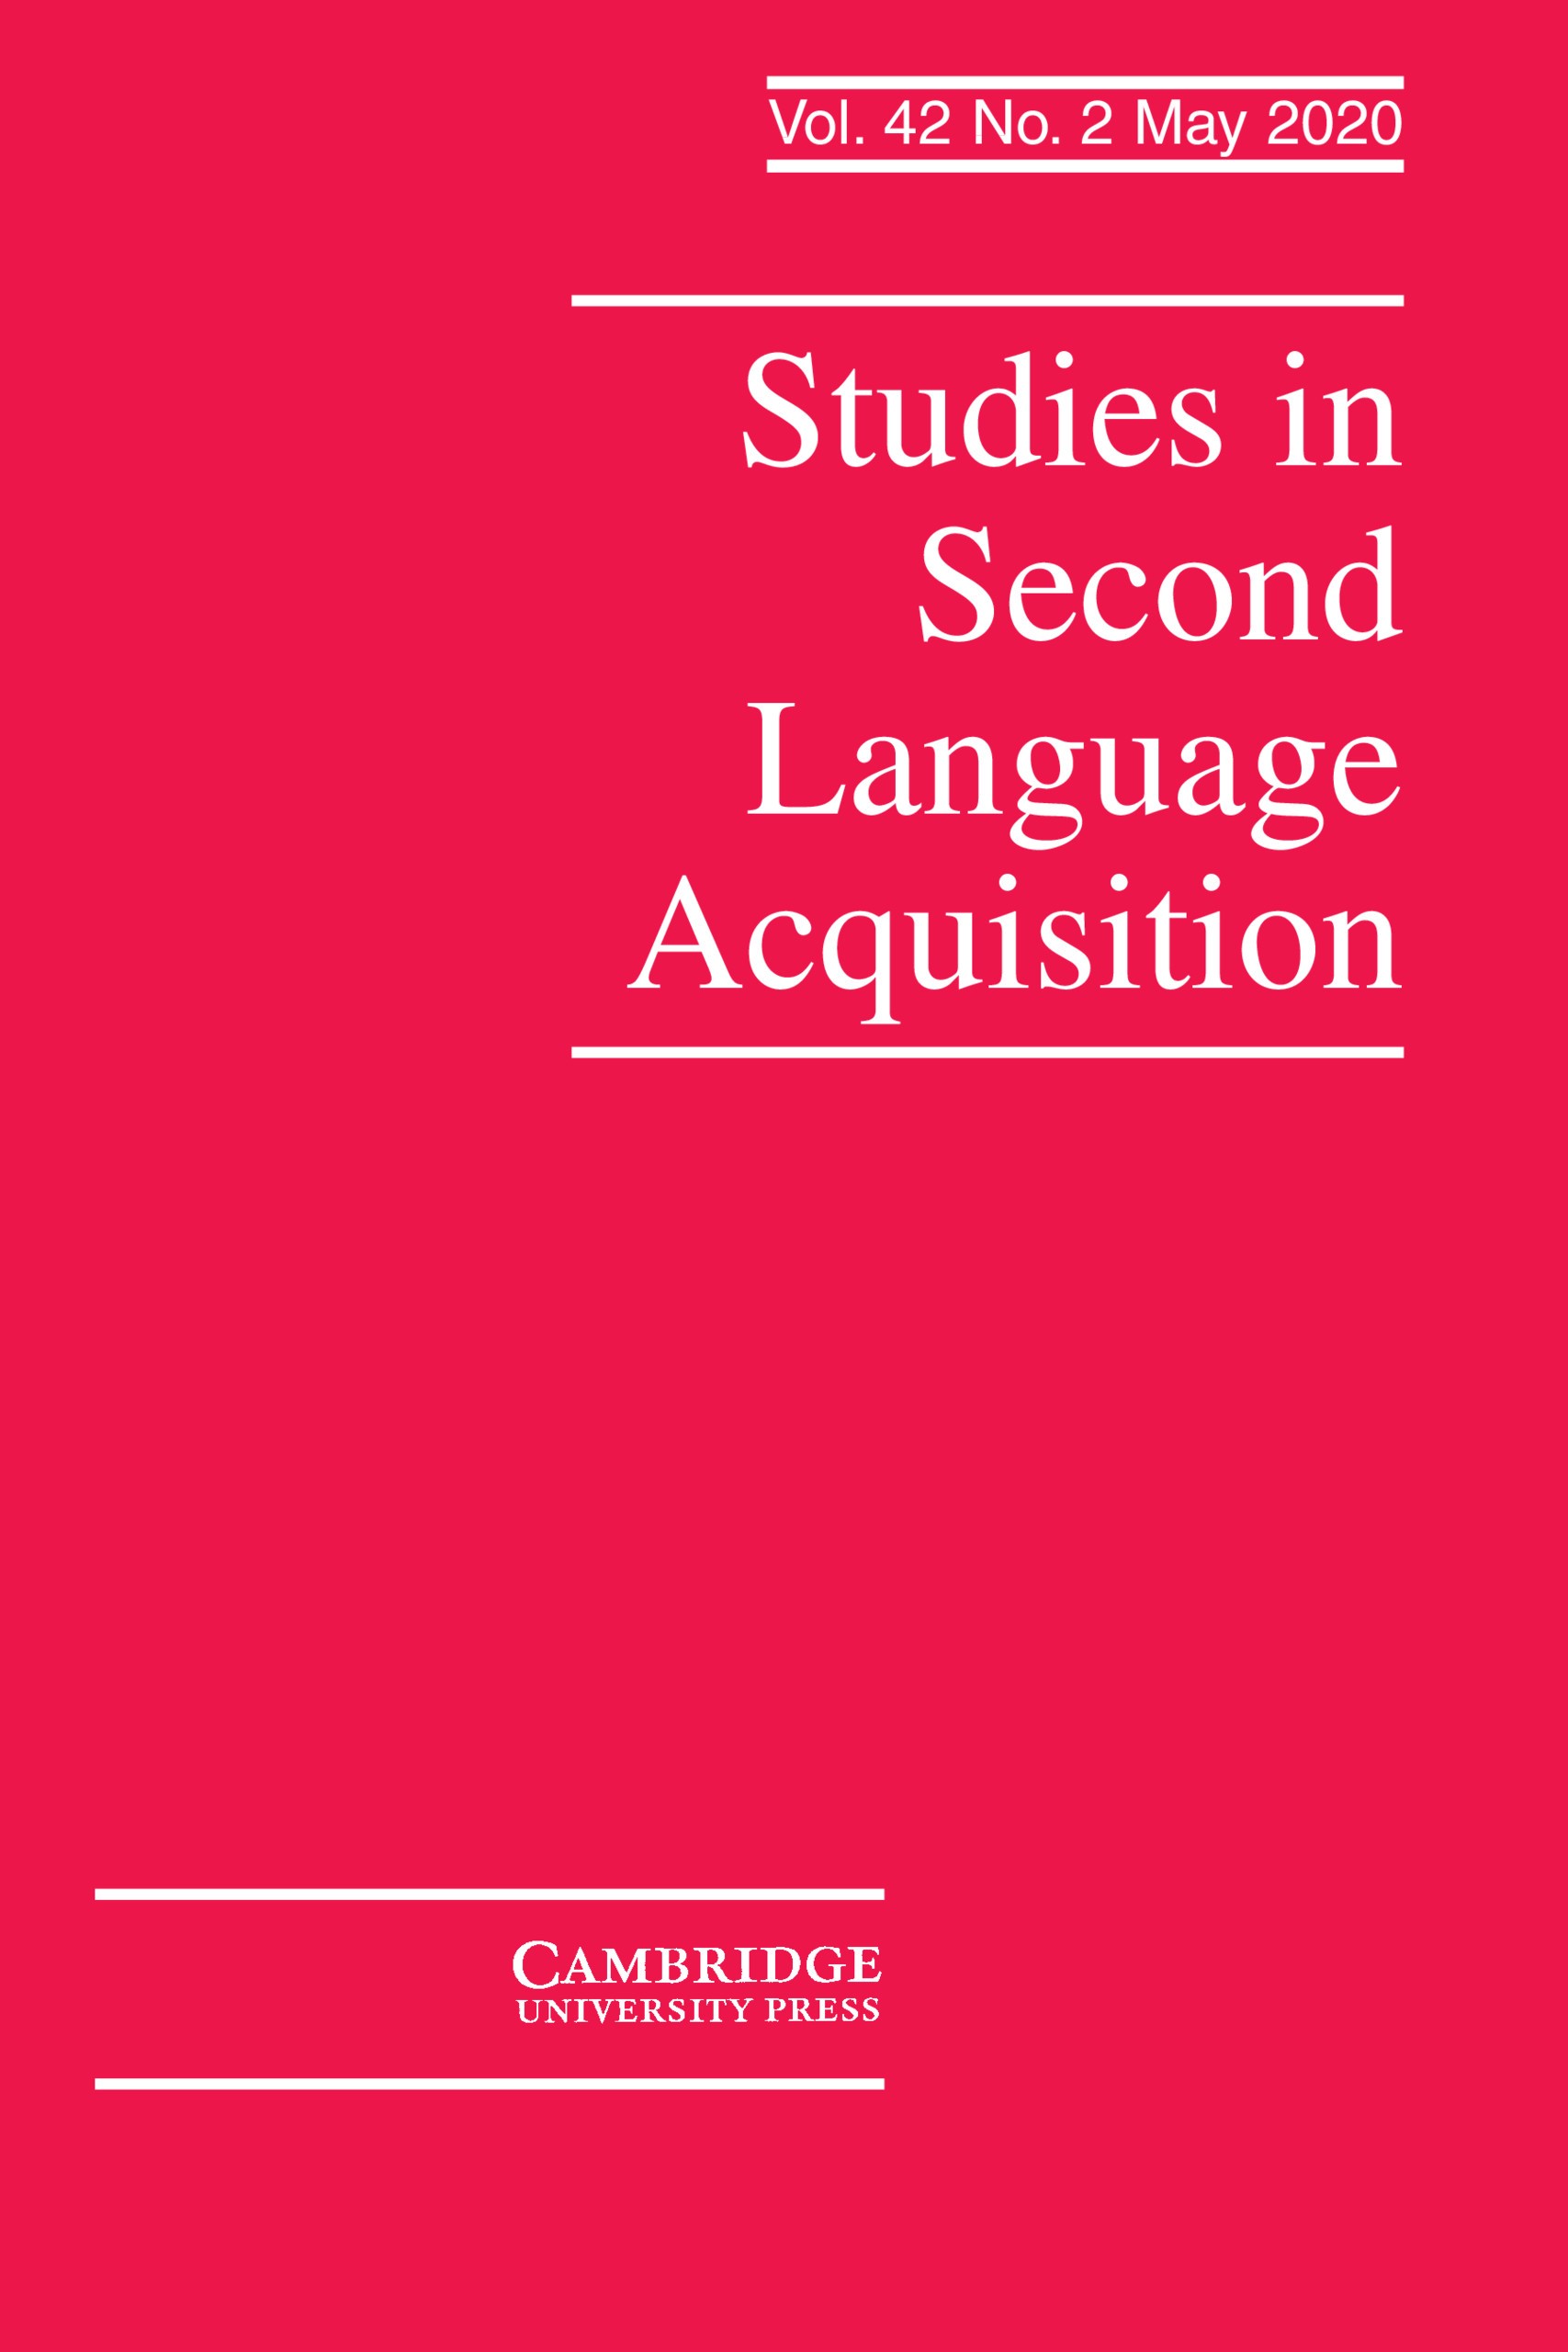 sample research paper on language acquisition